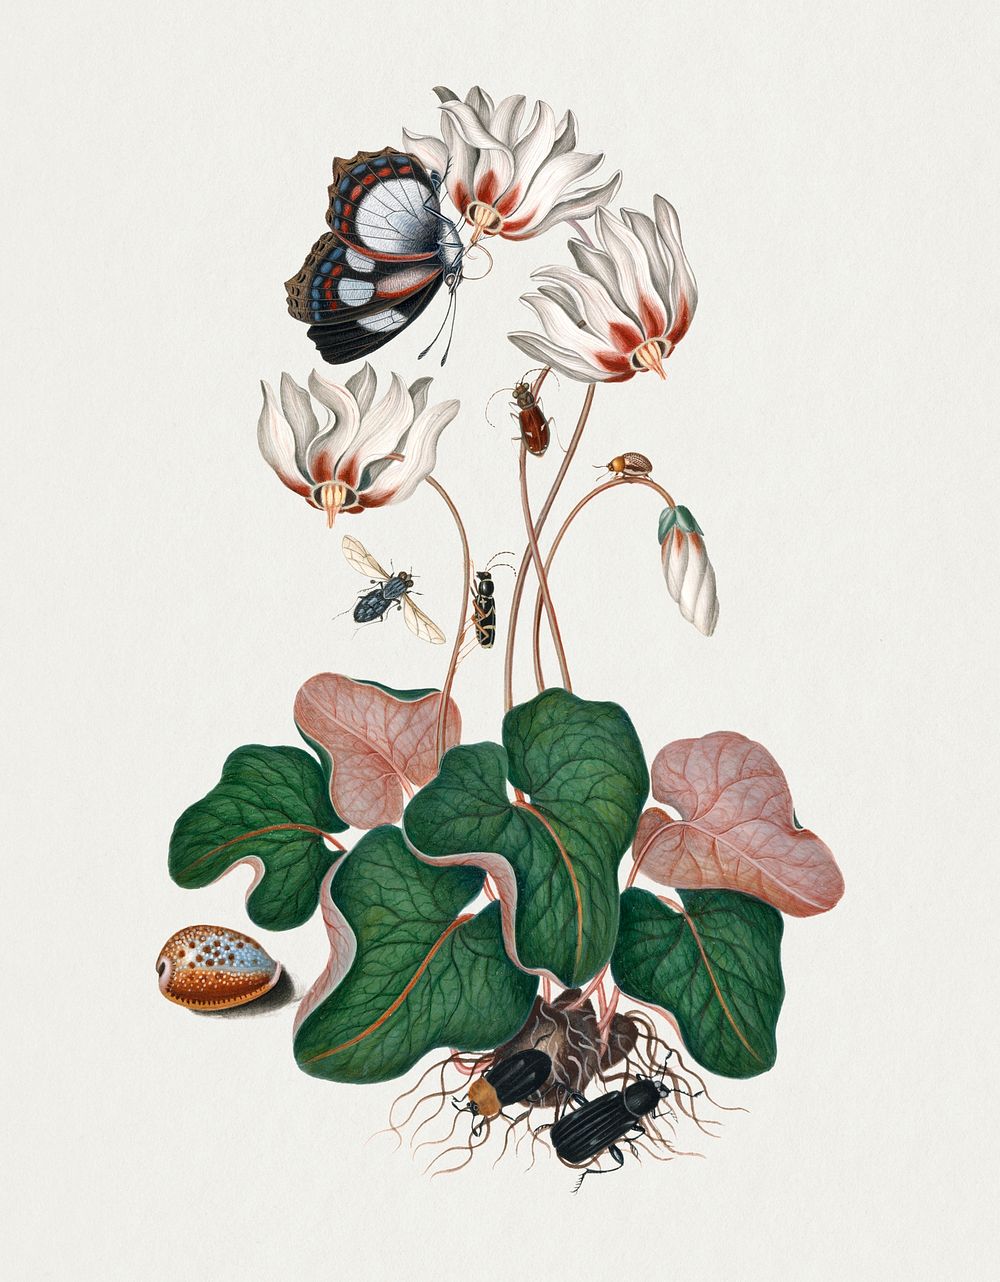 Cyclamen, Northern dune tiger beetle, Leaf beetle, Flesh fly and Wasp beetle from the Natural History Cabinet of Anna…